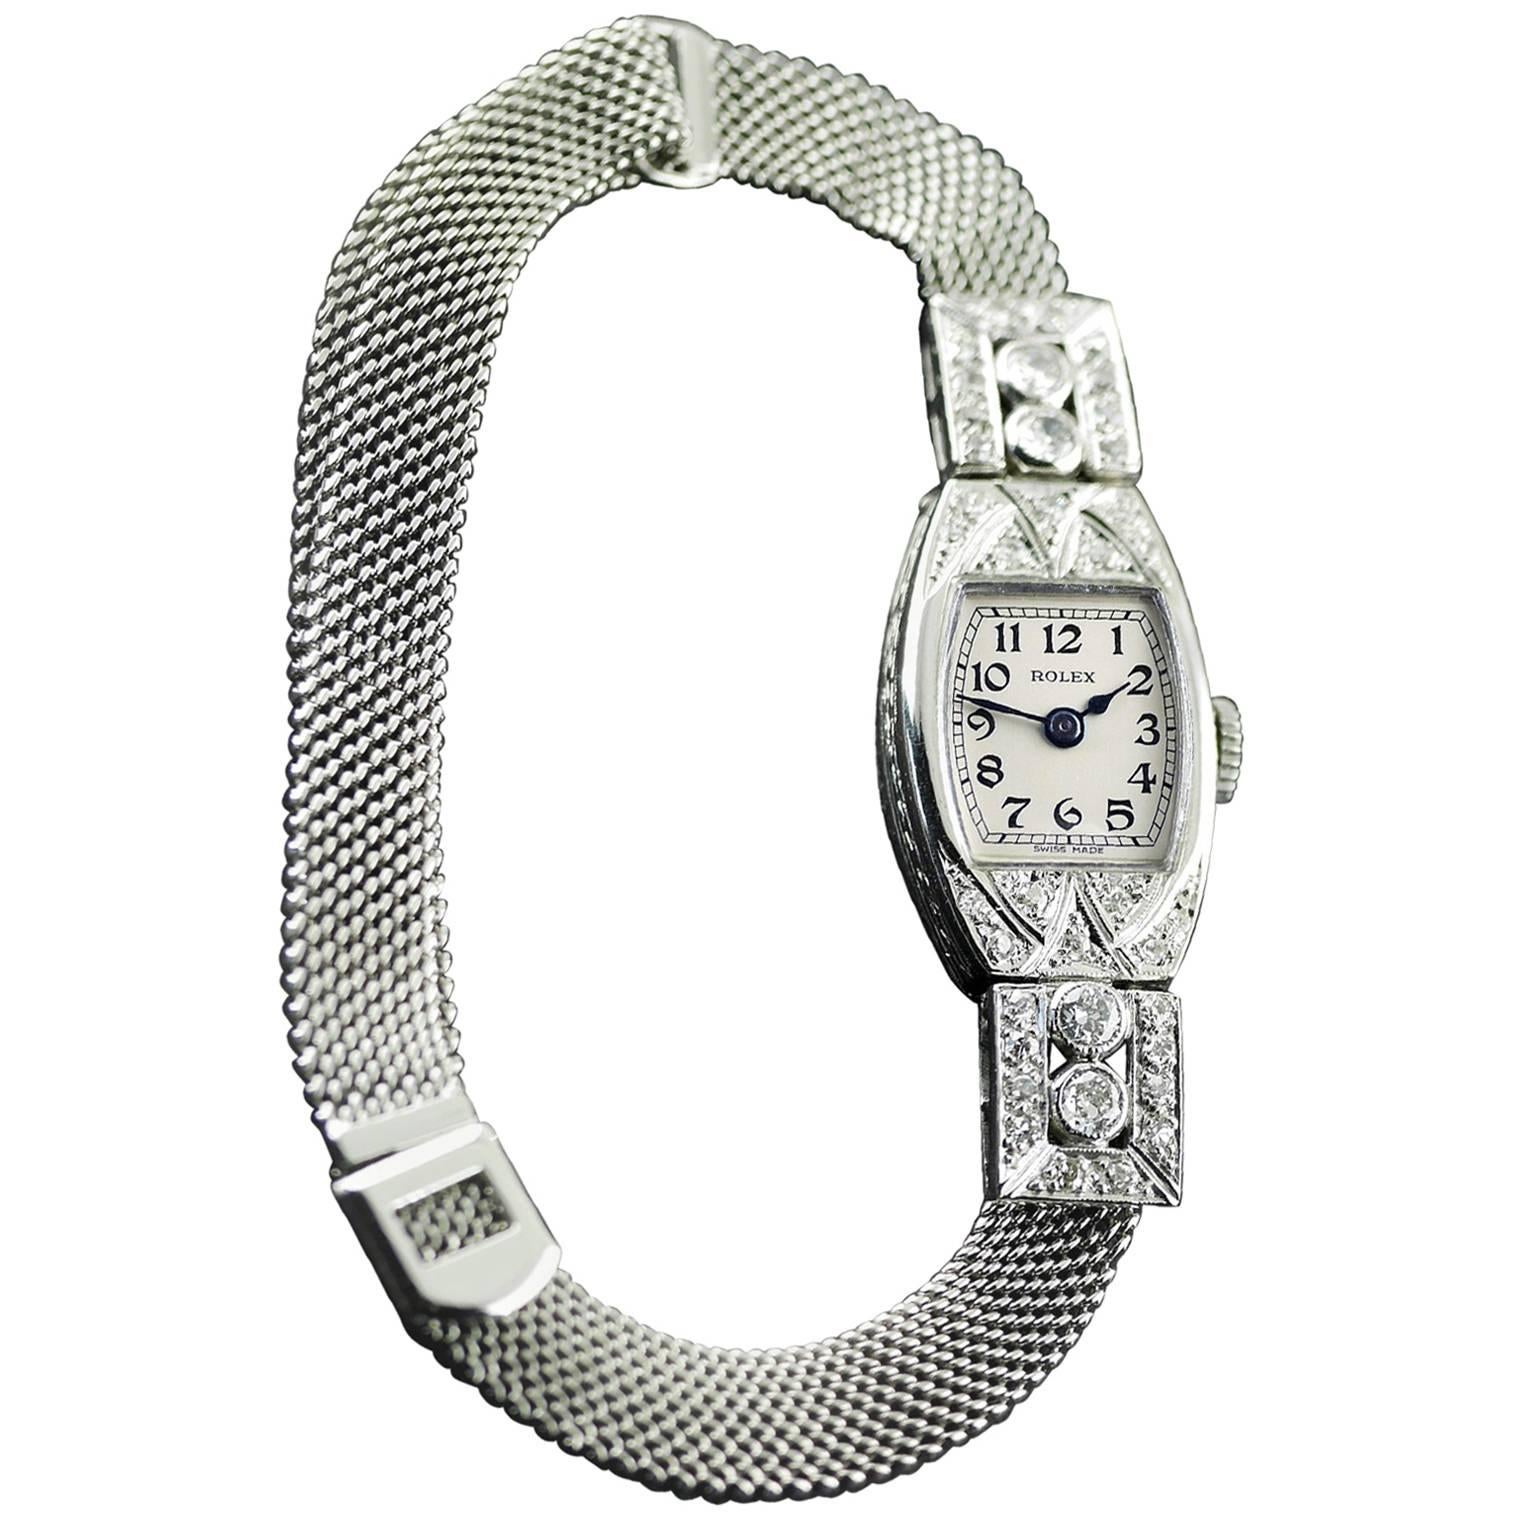 An Art Deco vintage wristwatch by Rolex made in 1926.

18 carat white gold case, set with diamonds with engraved 